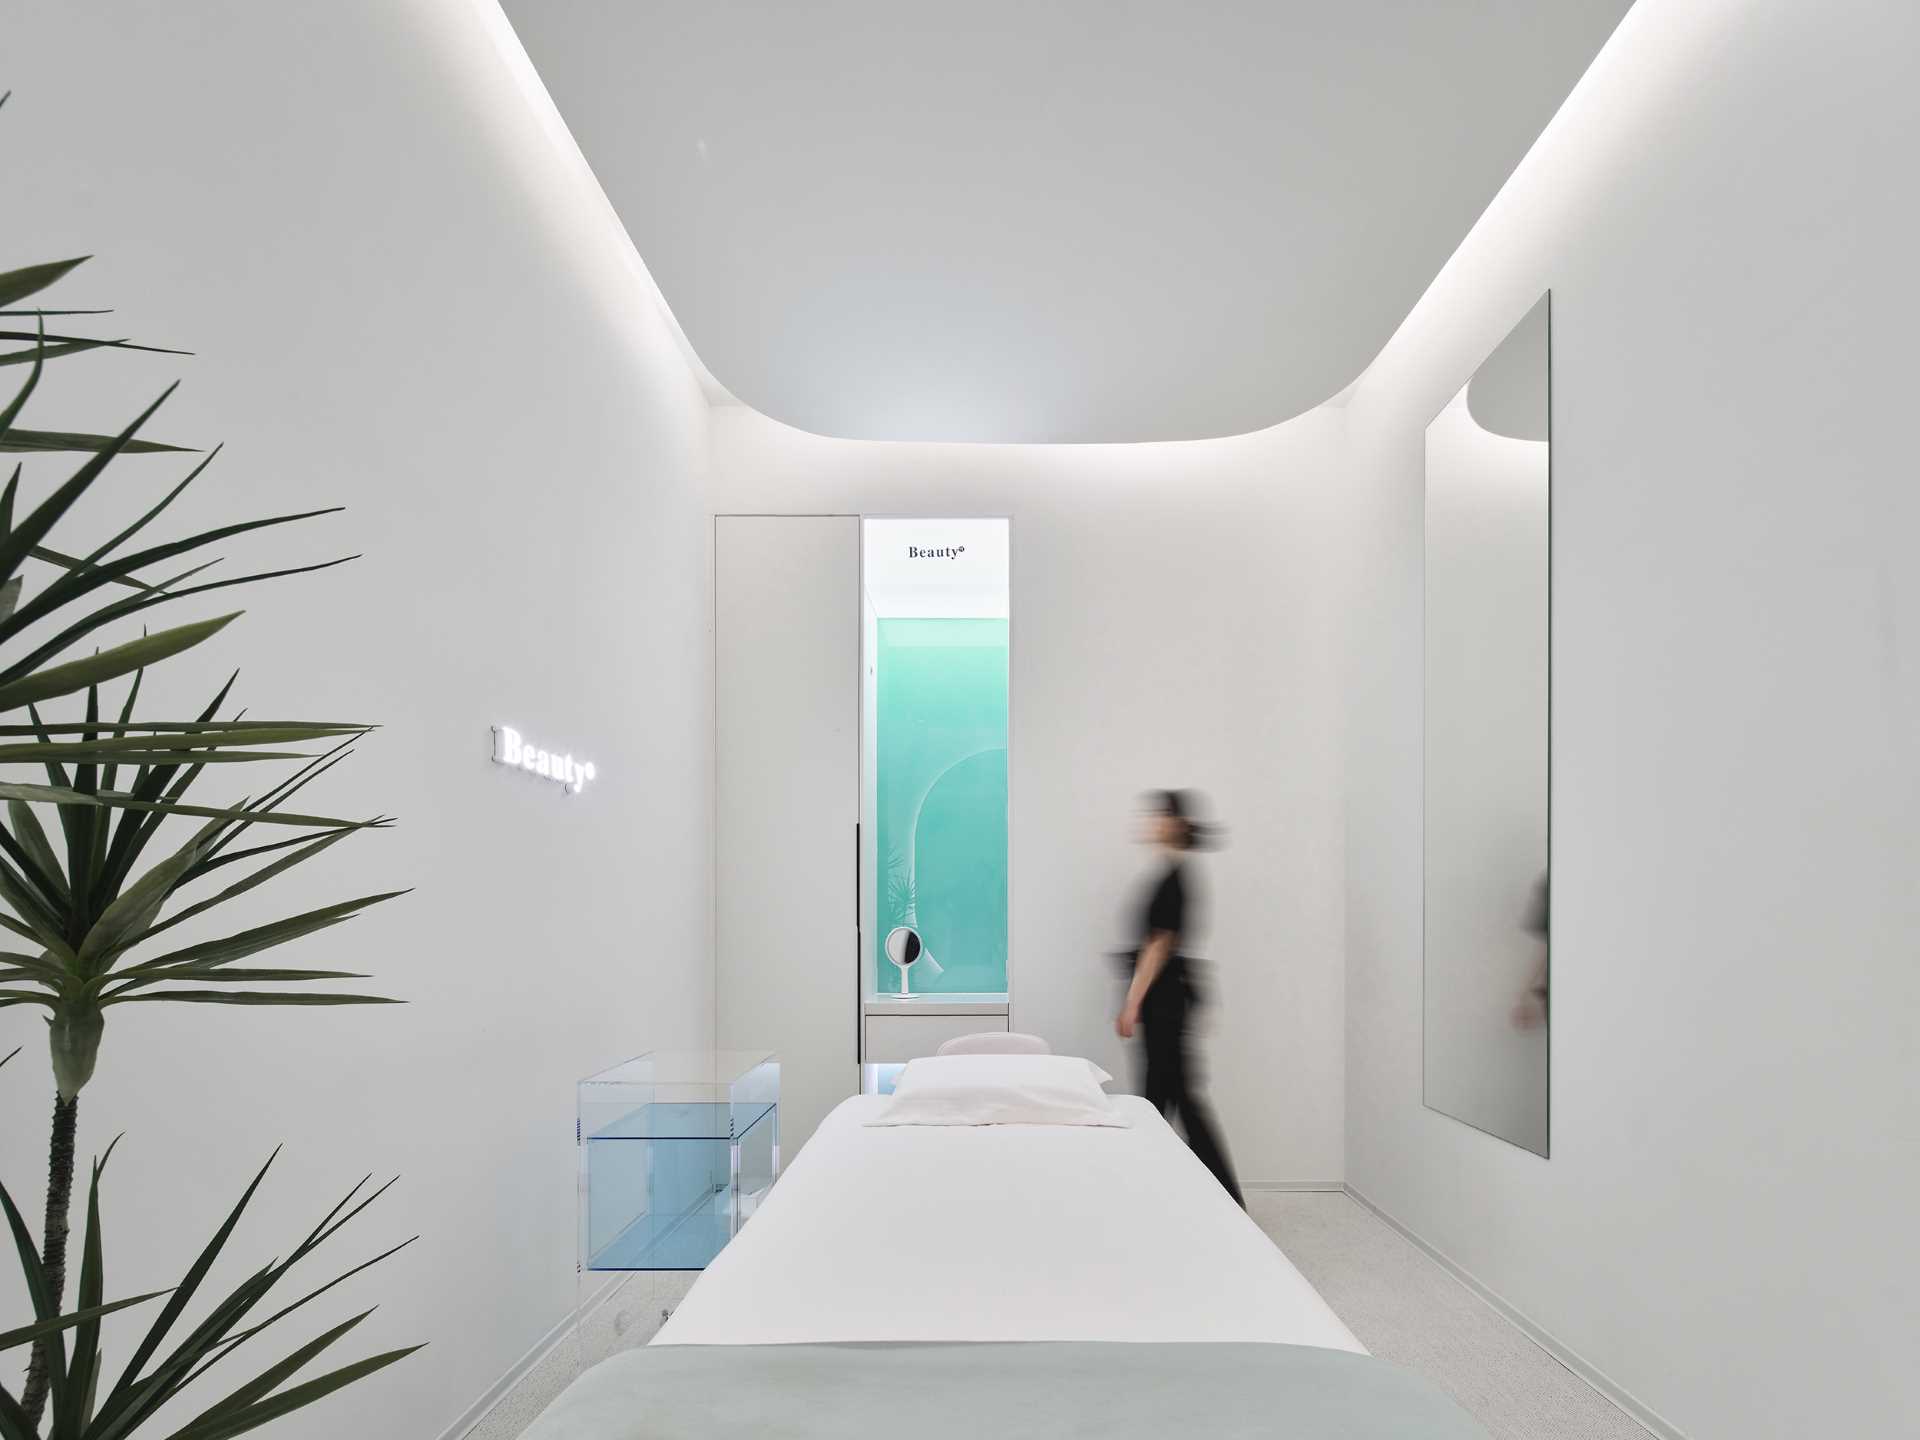 The single-person treatment room has a rectangular layout with a rounded ceiling detail to soften the corners. A large mirror makes the space feel larger, while the opposite wall features a blue-green gradient glass accent.